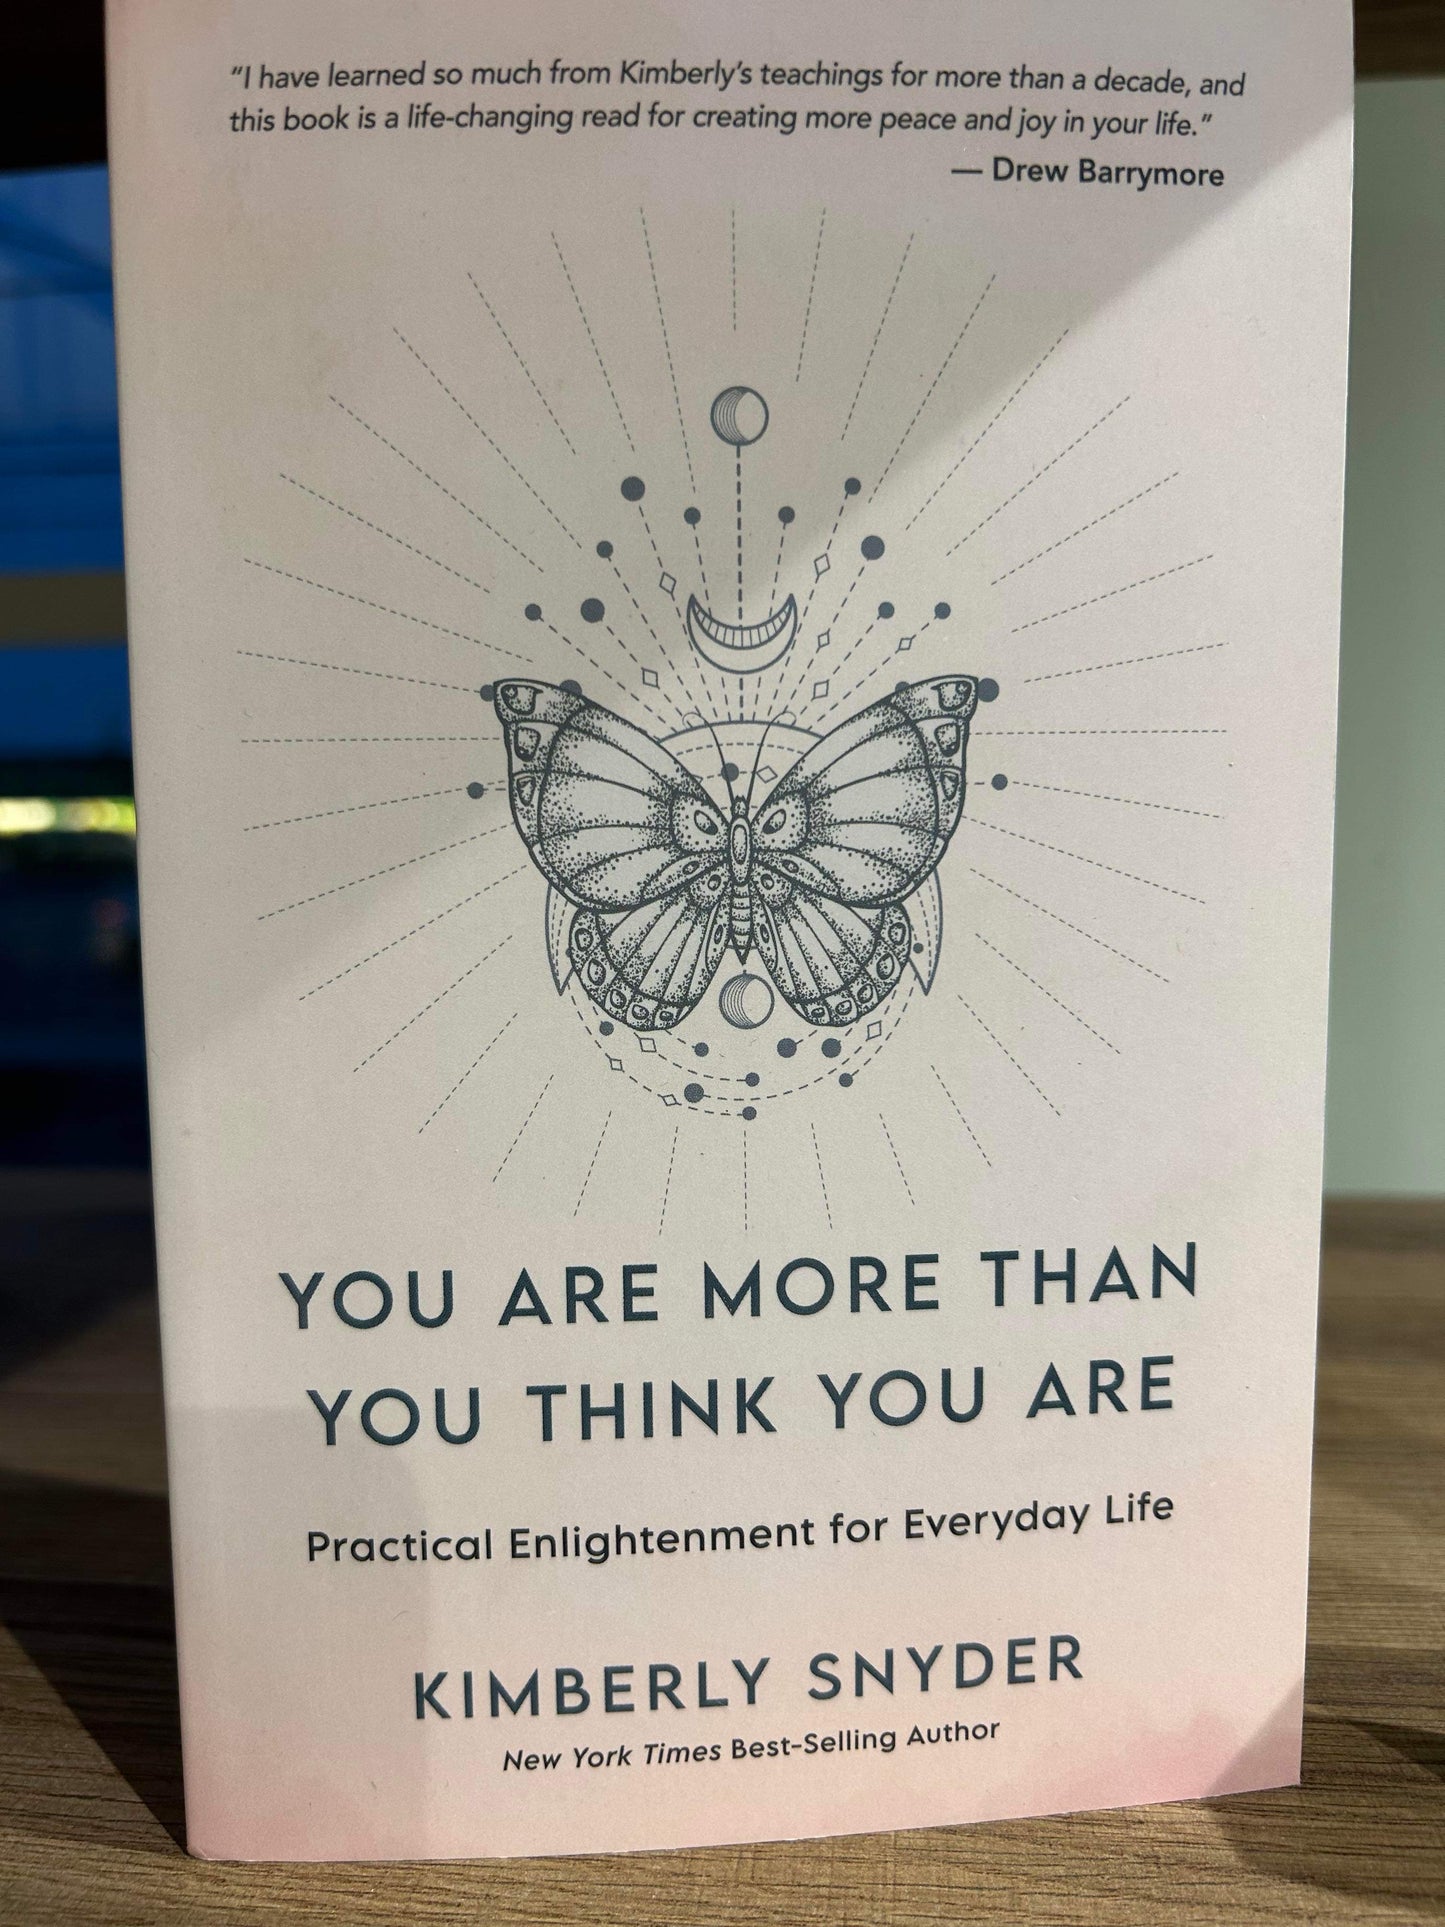 You Are More Than You Think You Are by Kimberly Snyder